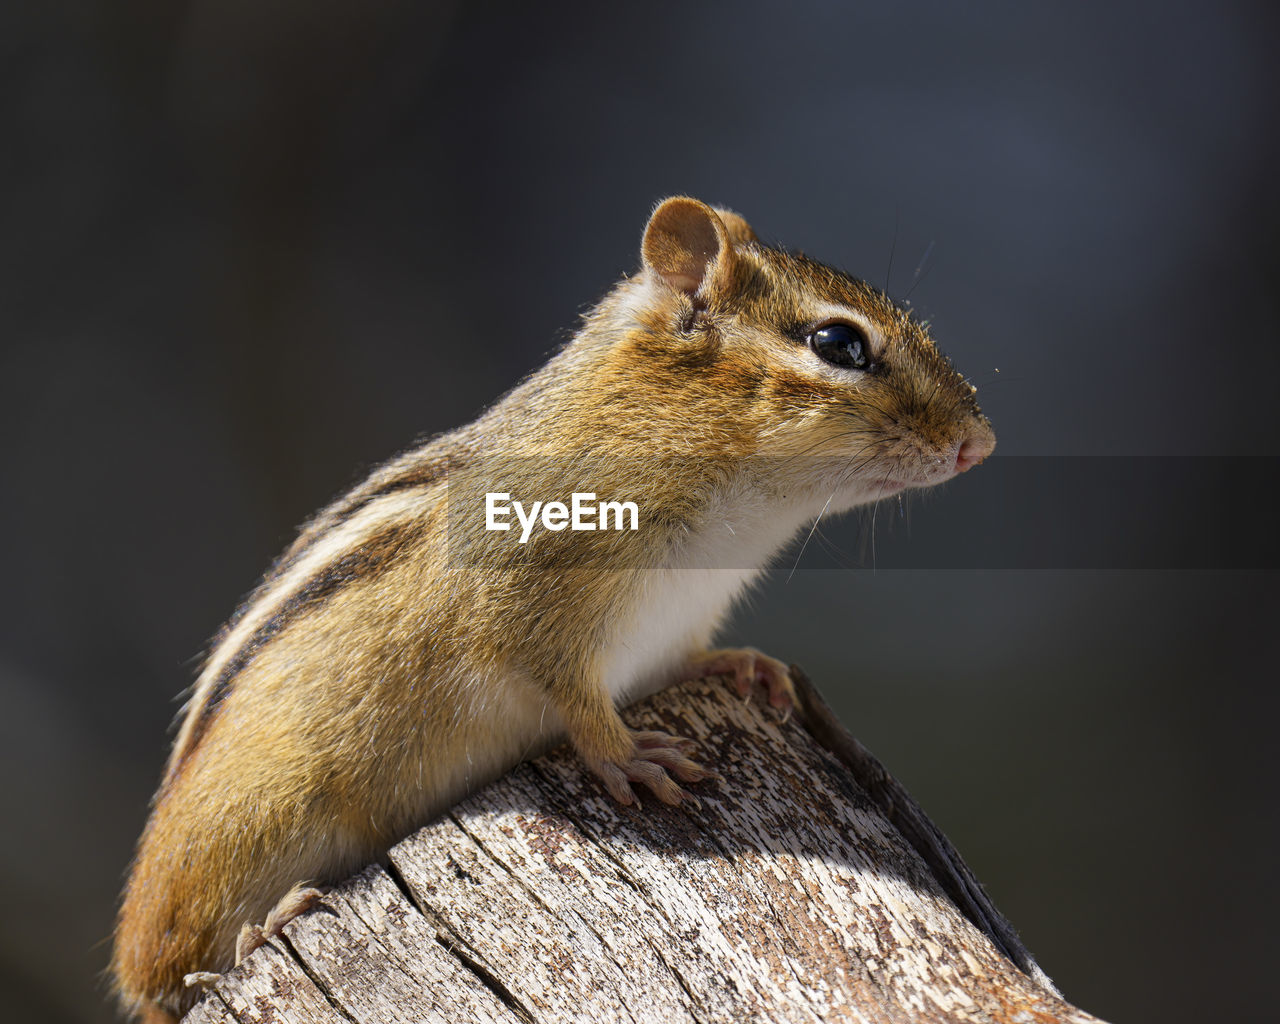 CLOSE-UP OF SQUIRREL ON WOODEN TREE